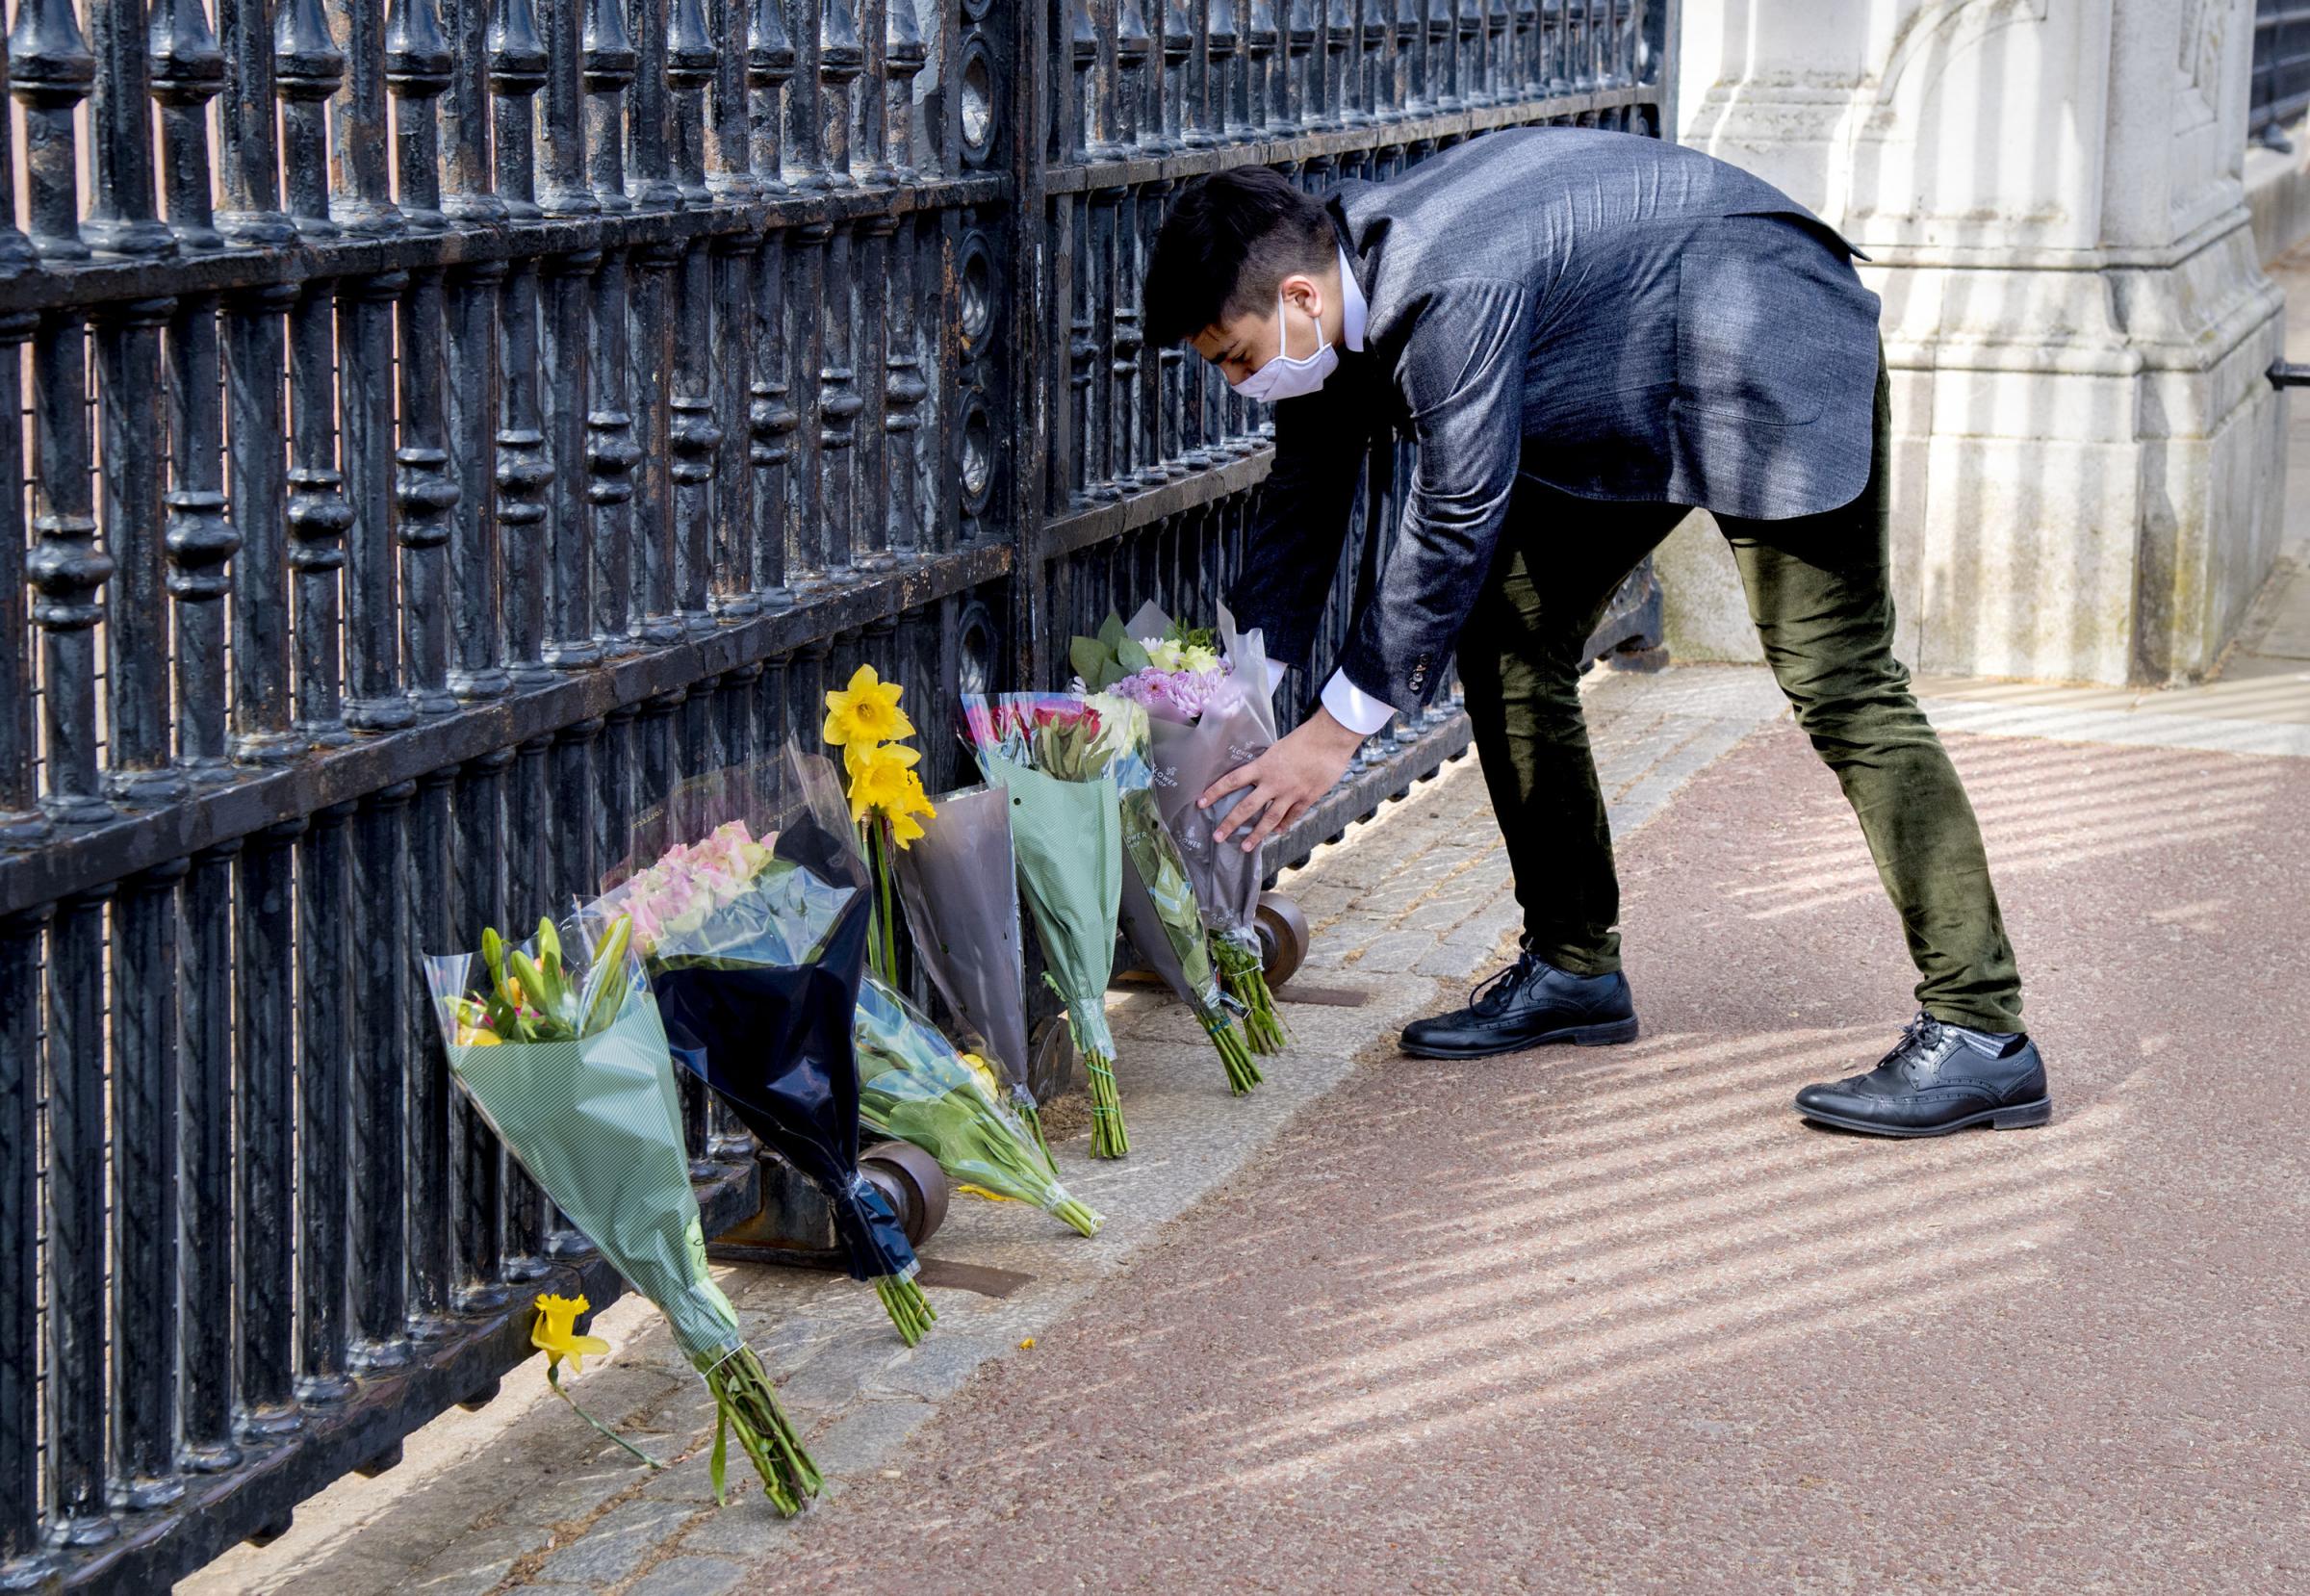 A member of the public leaves flowers outside Buckingham Palace, London, following the announcement of the death of the Duke of Edinburgh at the age of 99. Picture date: Friday April 9, 2021. PA Photo. Prince Philip, 99, was the longest-serving consort